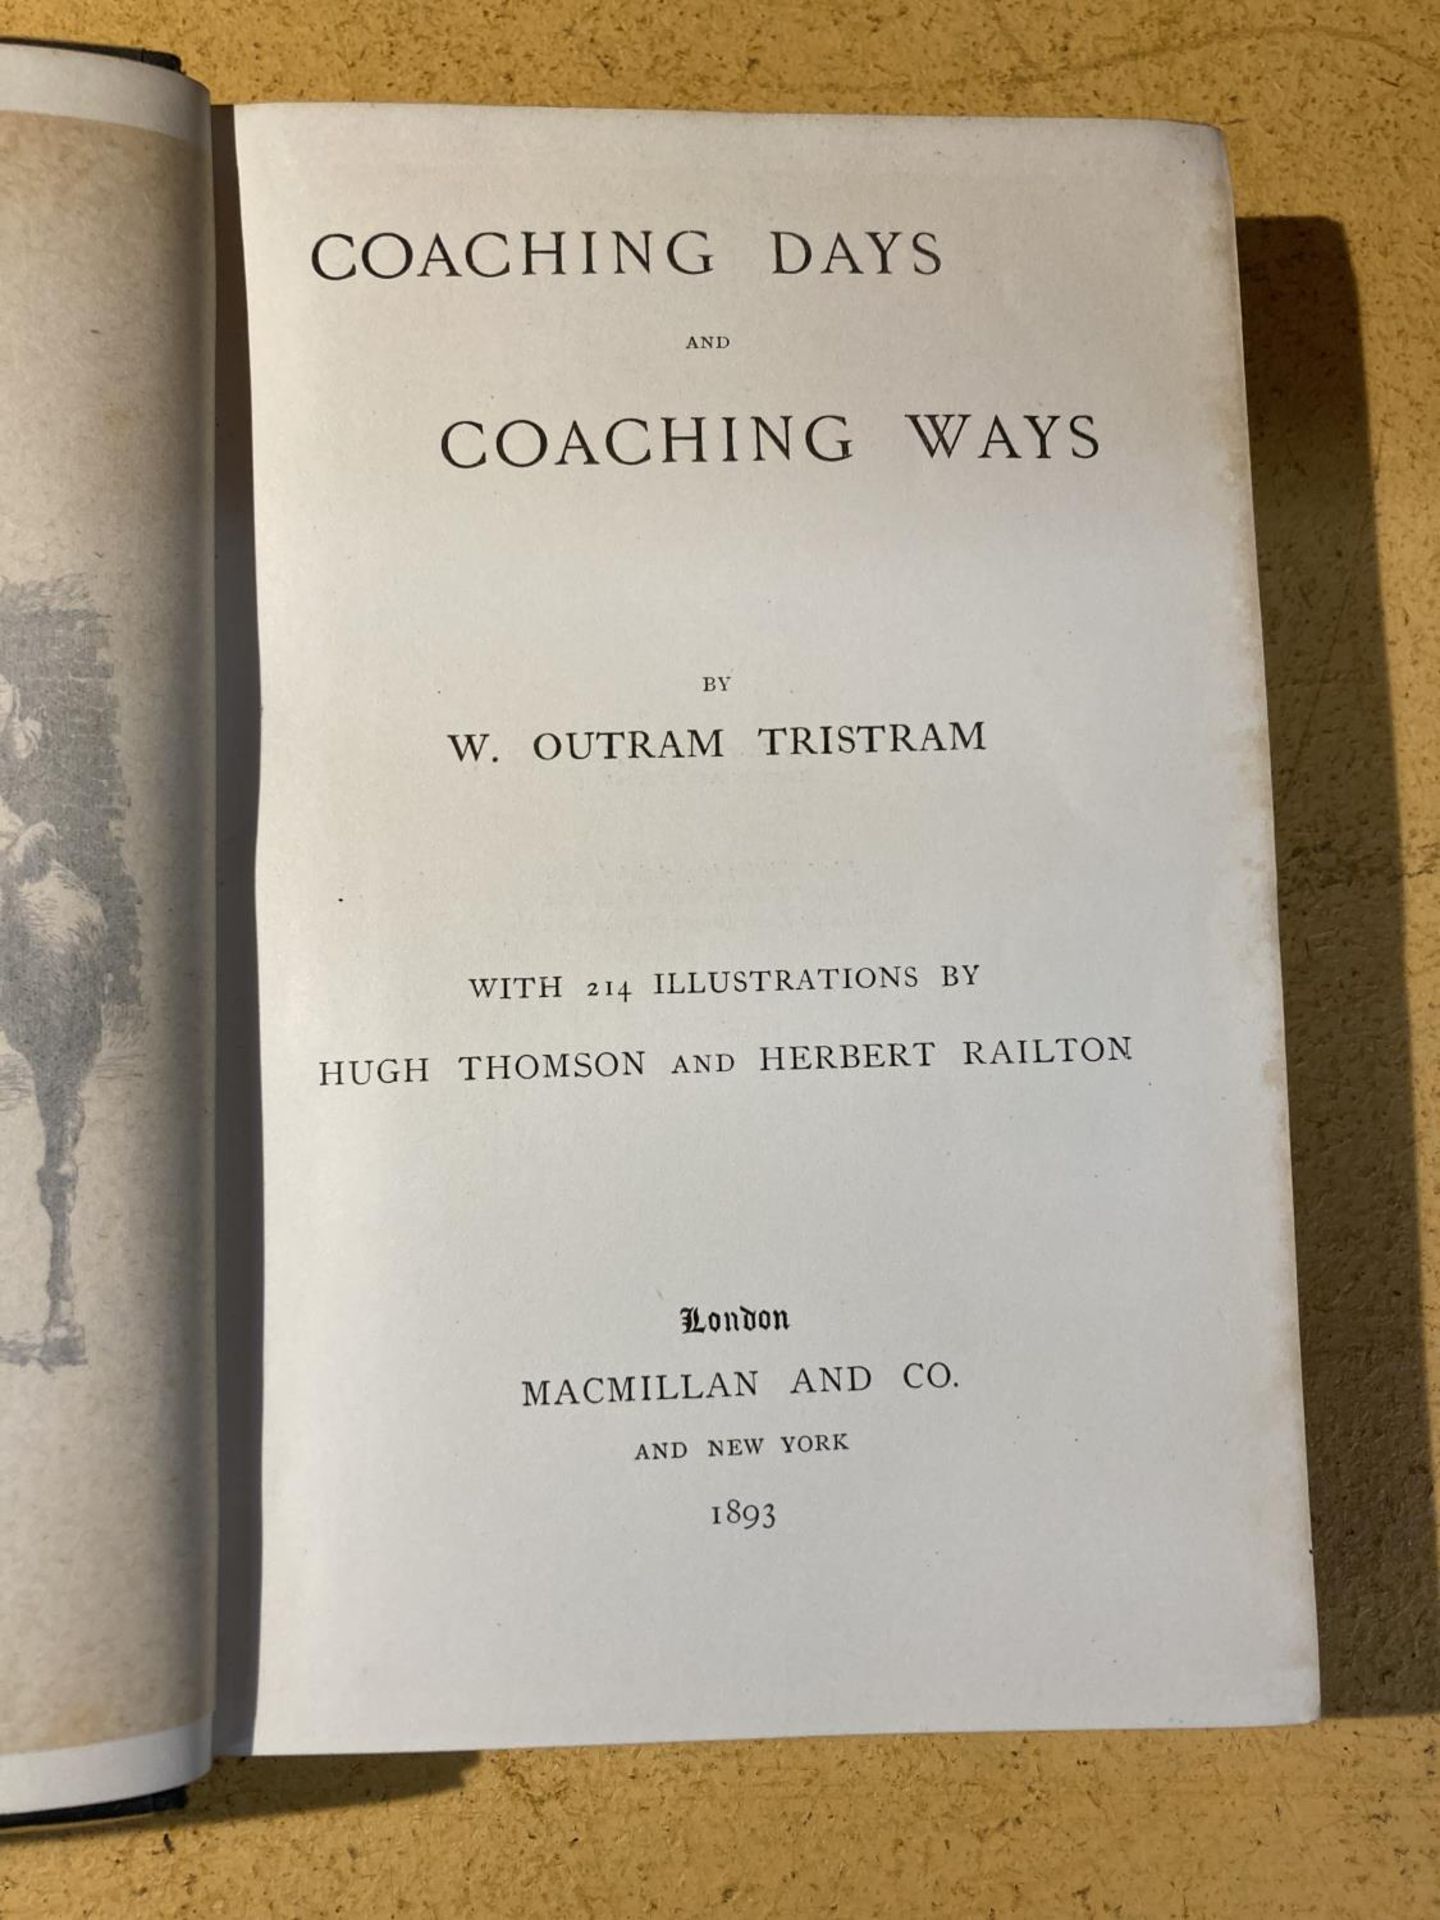 COACHING DAYS AND COACHING WAYS - W OUTRAM TRISTRAM - 1893 PUBLISHED BY MACMILLAN & CO - Image 2 of 2